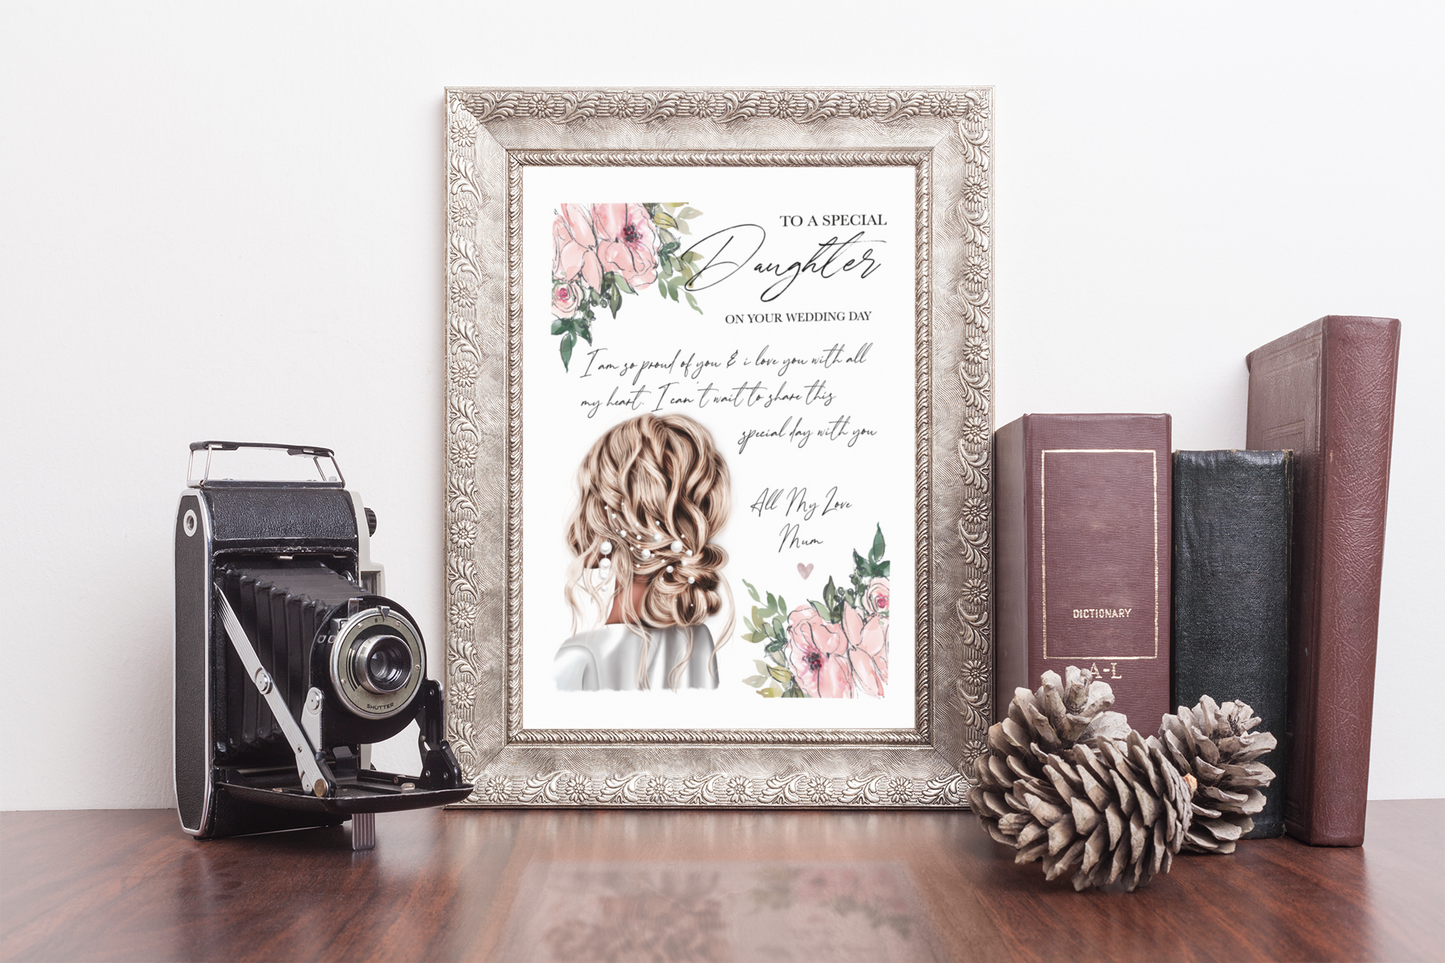 Wedding print for a daughter with a bride on the front surrounded by a pink floral design. The wording reads to a special daughter' and has a custom message below in a lovely handwritten font.